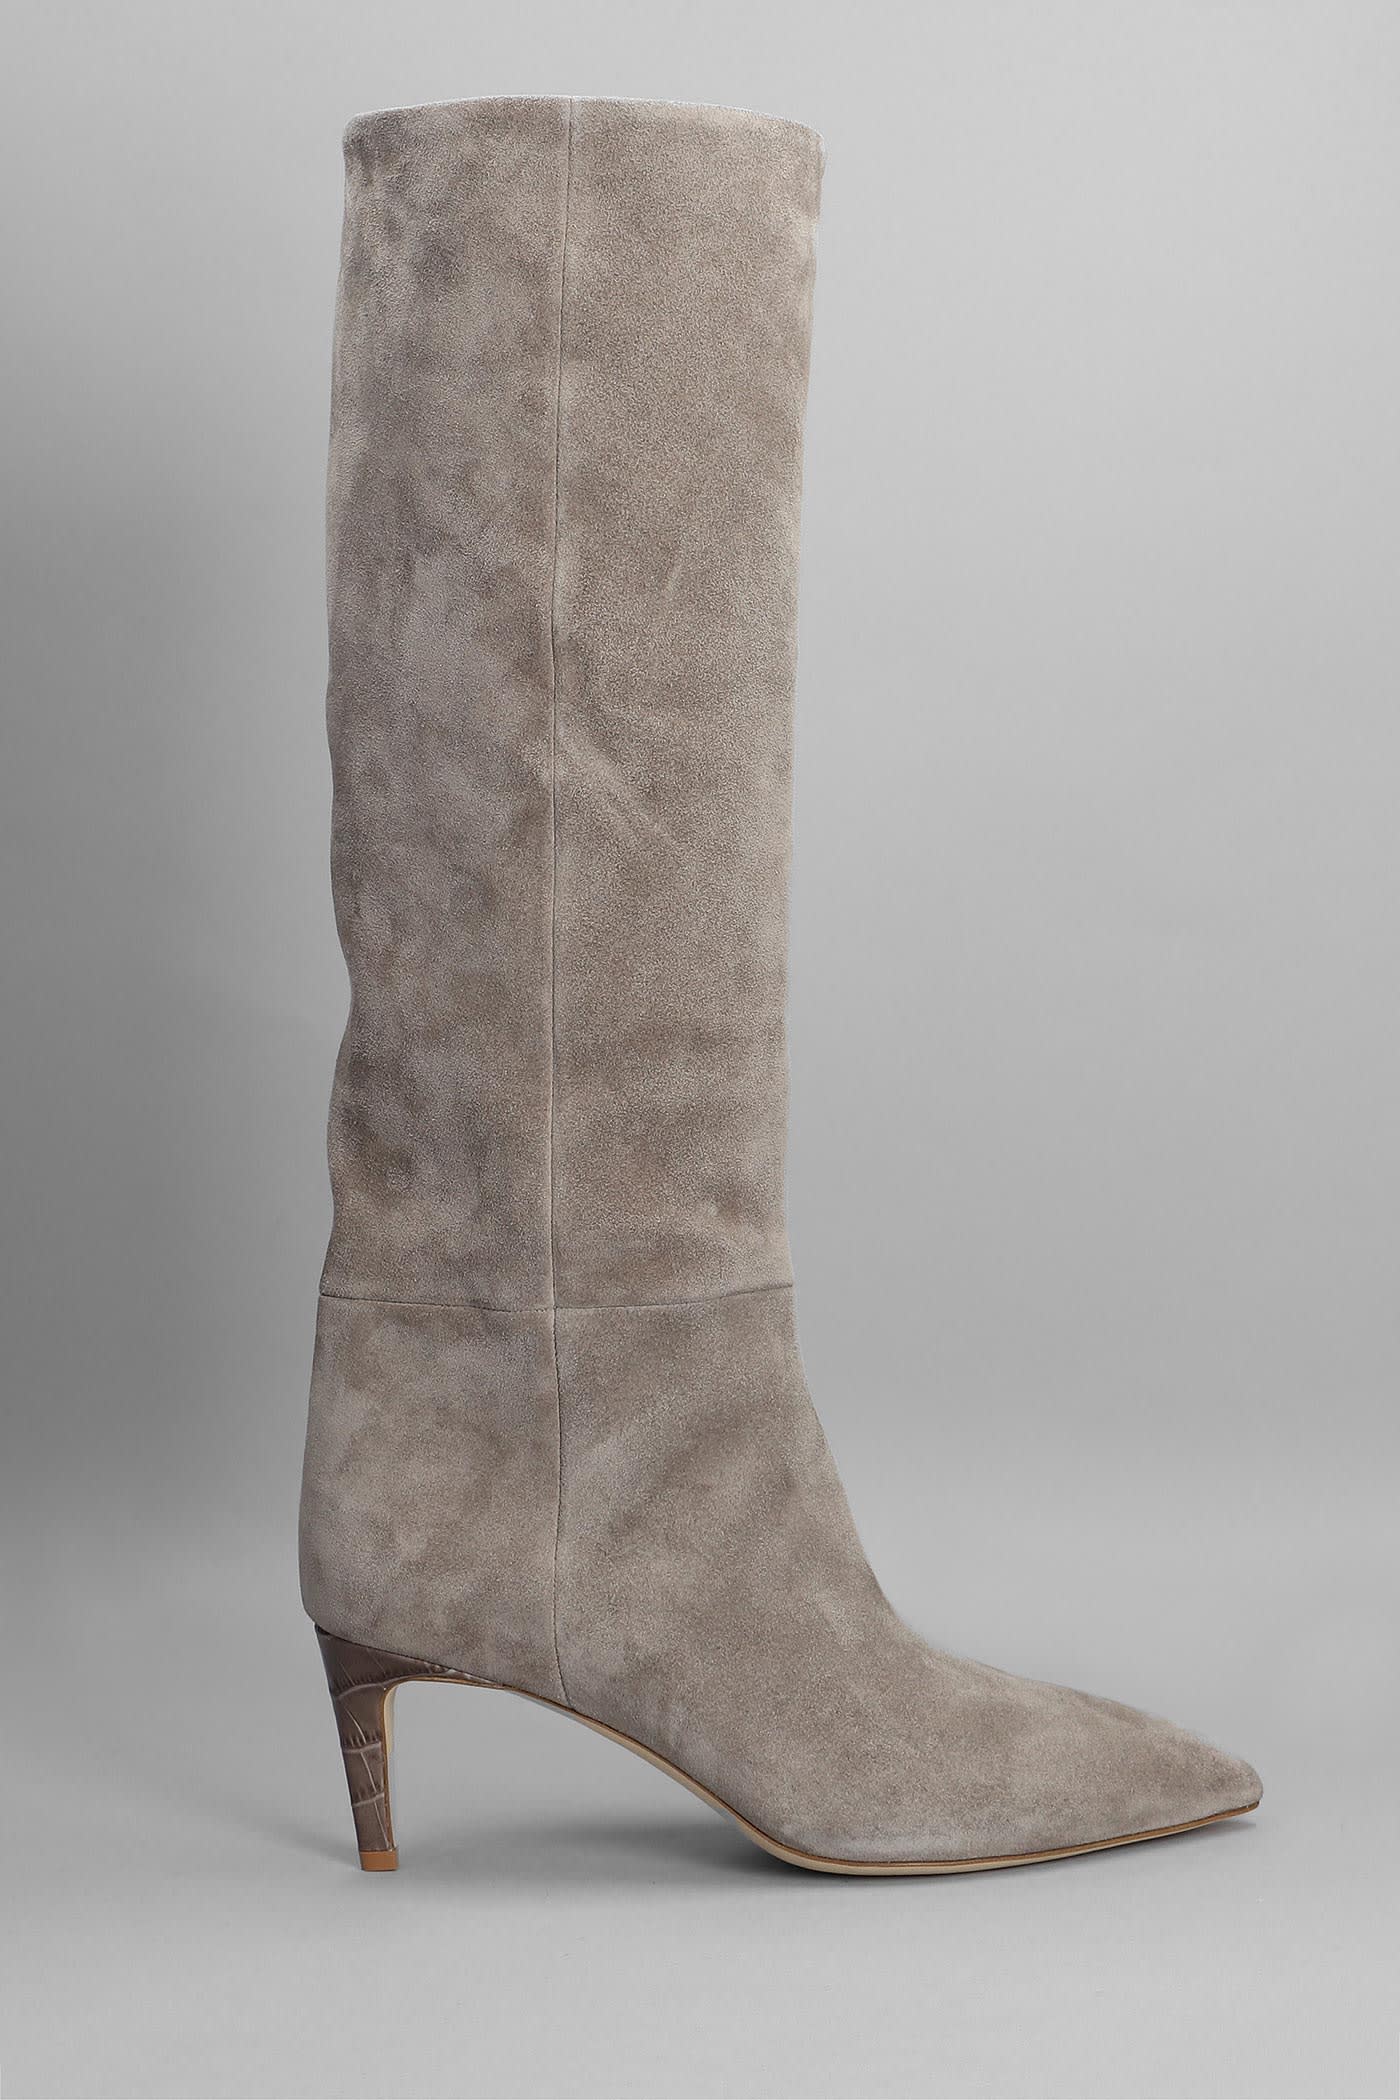 Paris Texas High Heels Boots In Taupe Suede